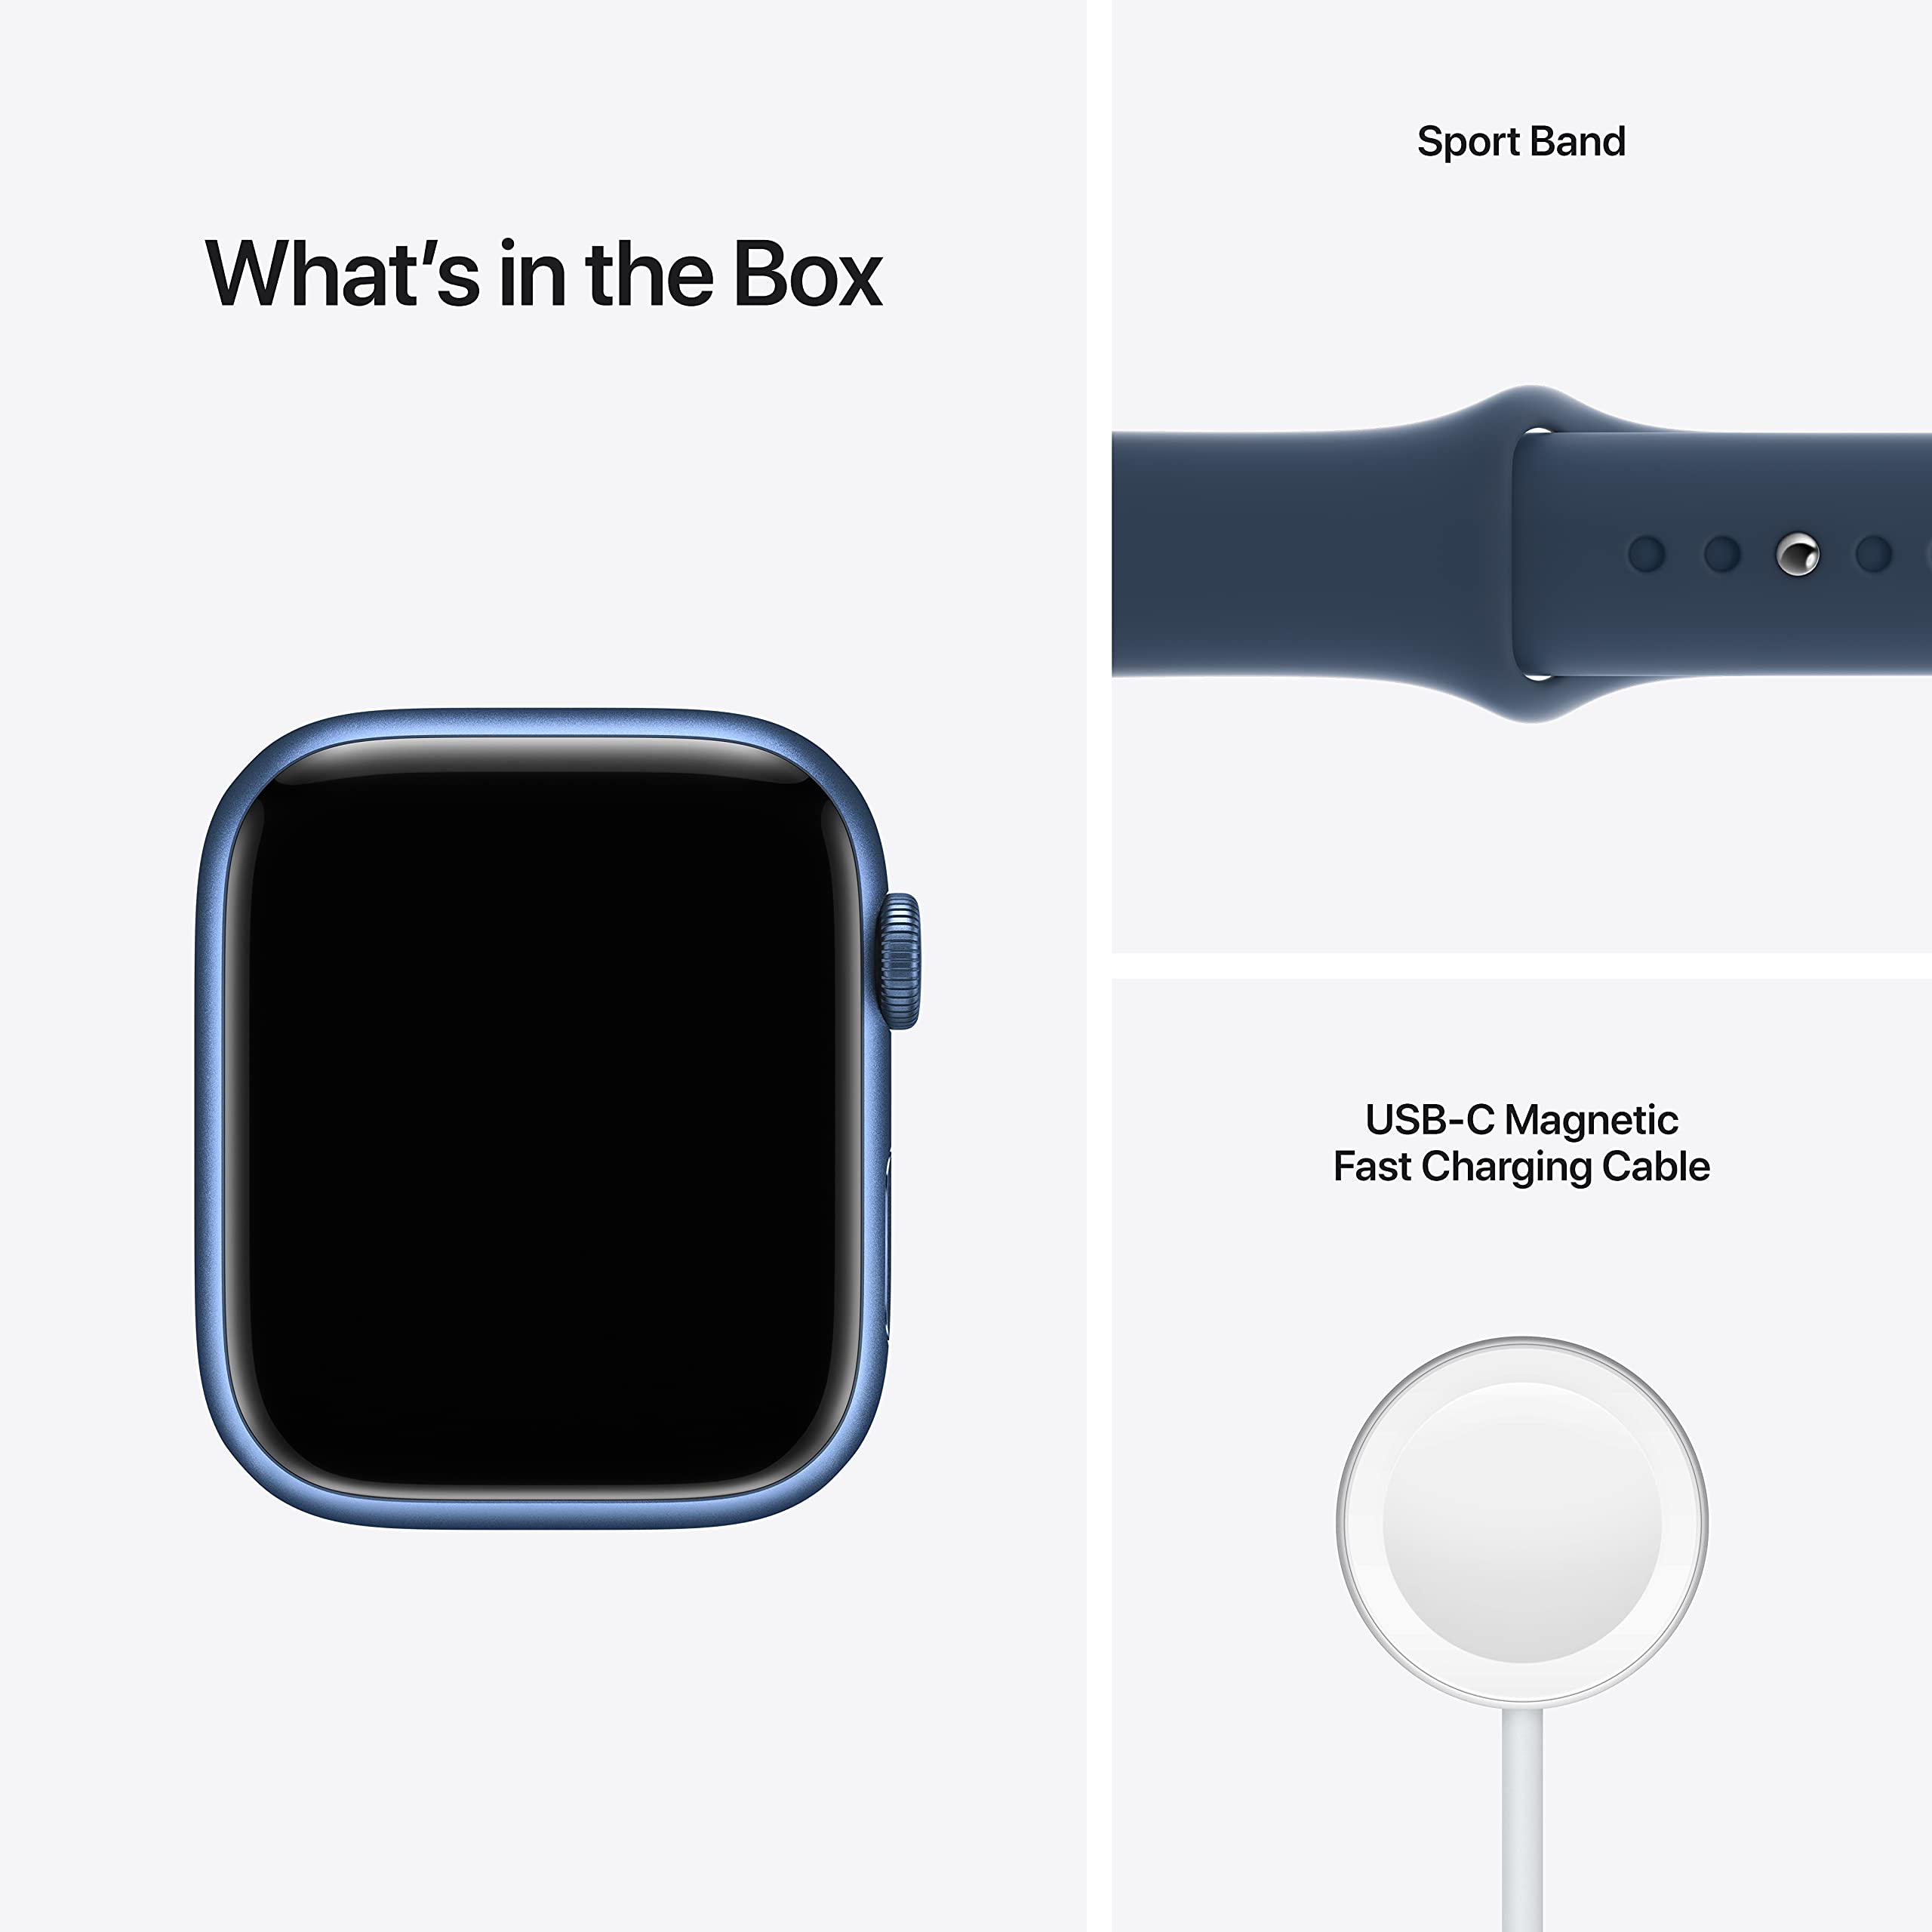 Apple Watch Series 7 [GPS 45mm] Smart Watch w/Blue Aluminum Case with Abyss Blue Sport Band. Fitness Tracker, Blood Oxygen & ECG Apps, Always-On Retina Display, Water Resistant